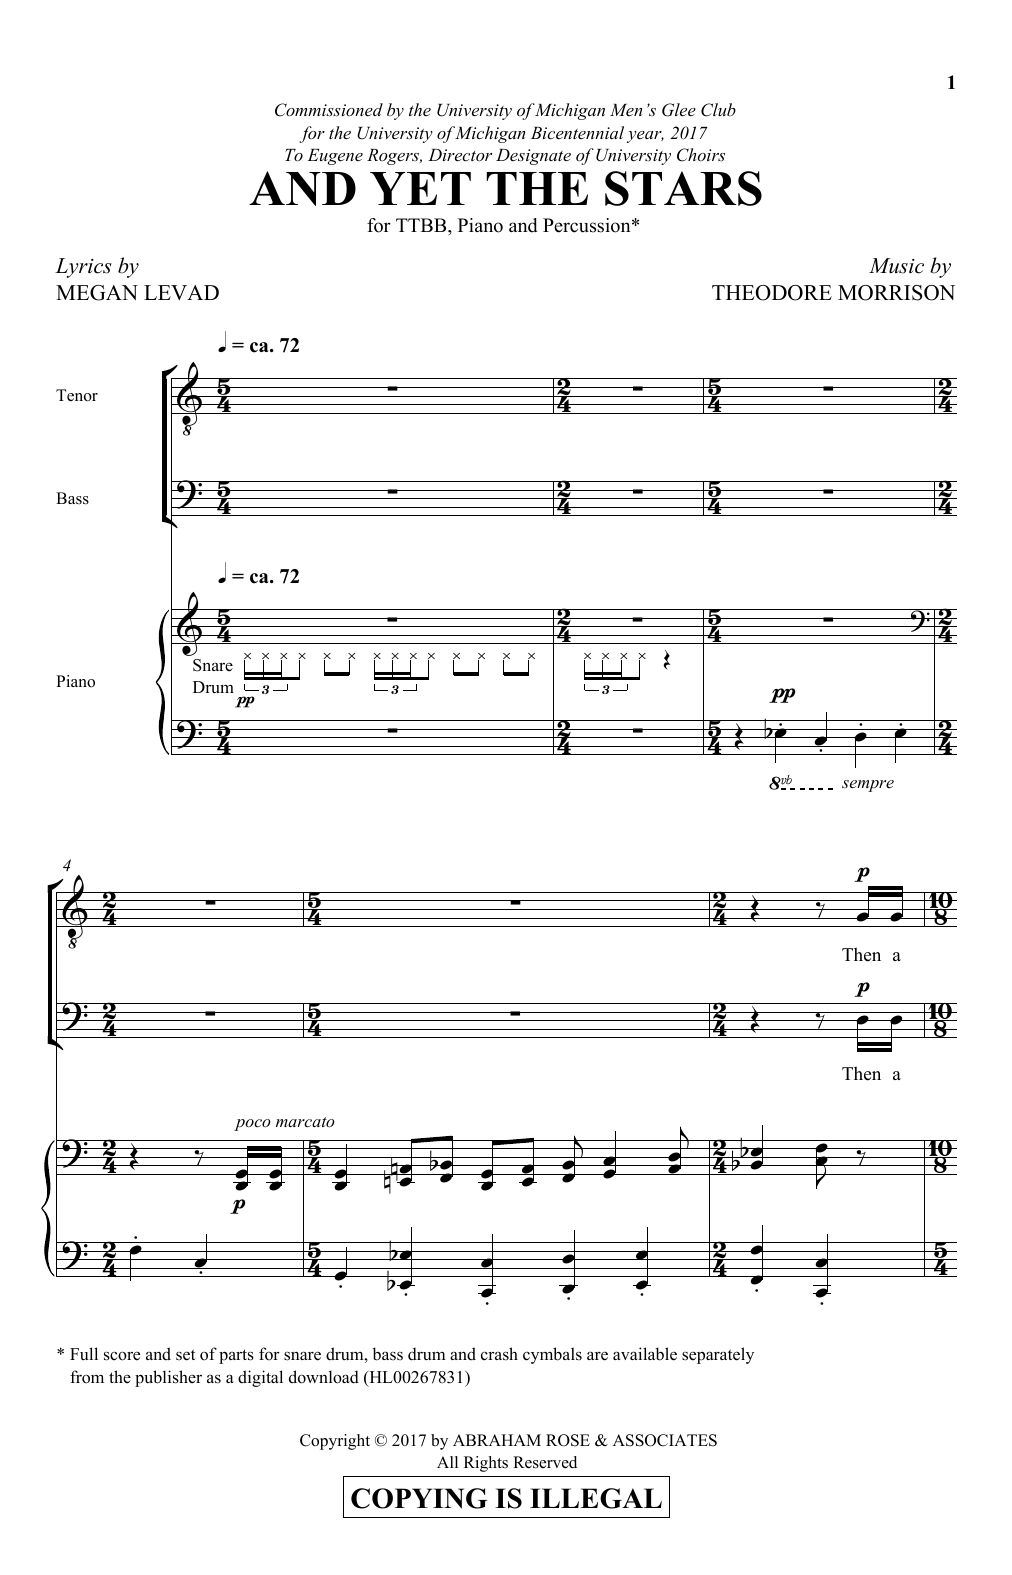 Download Theodore Morrison And Yet The Stars Sheet Music